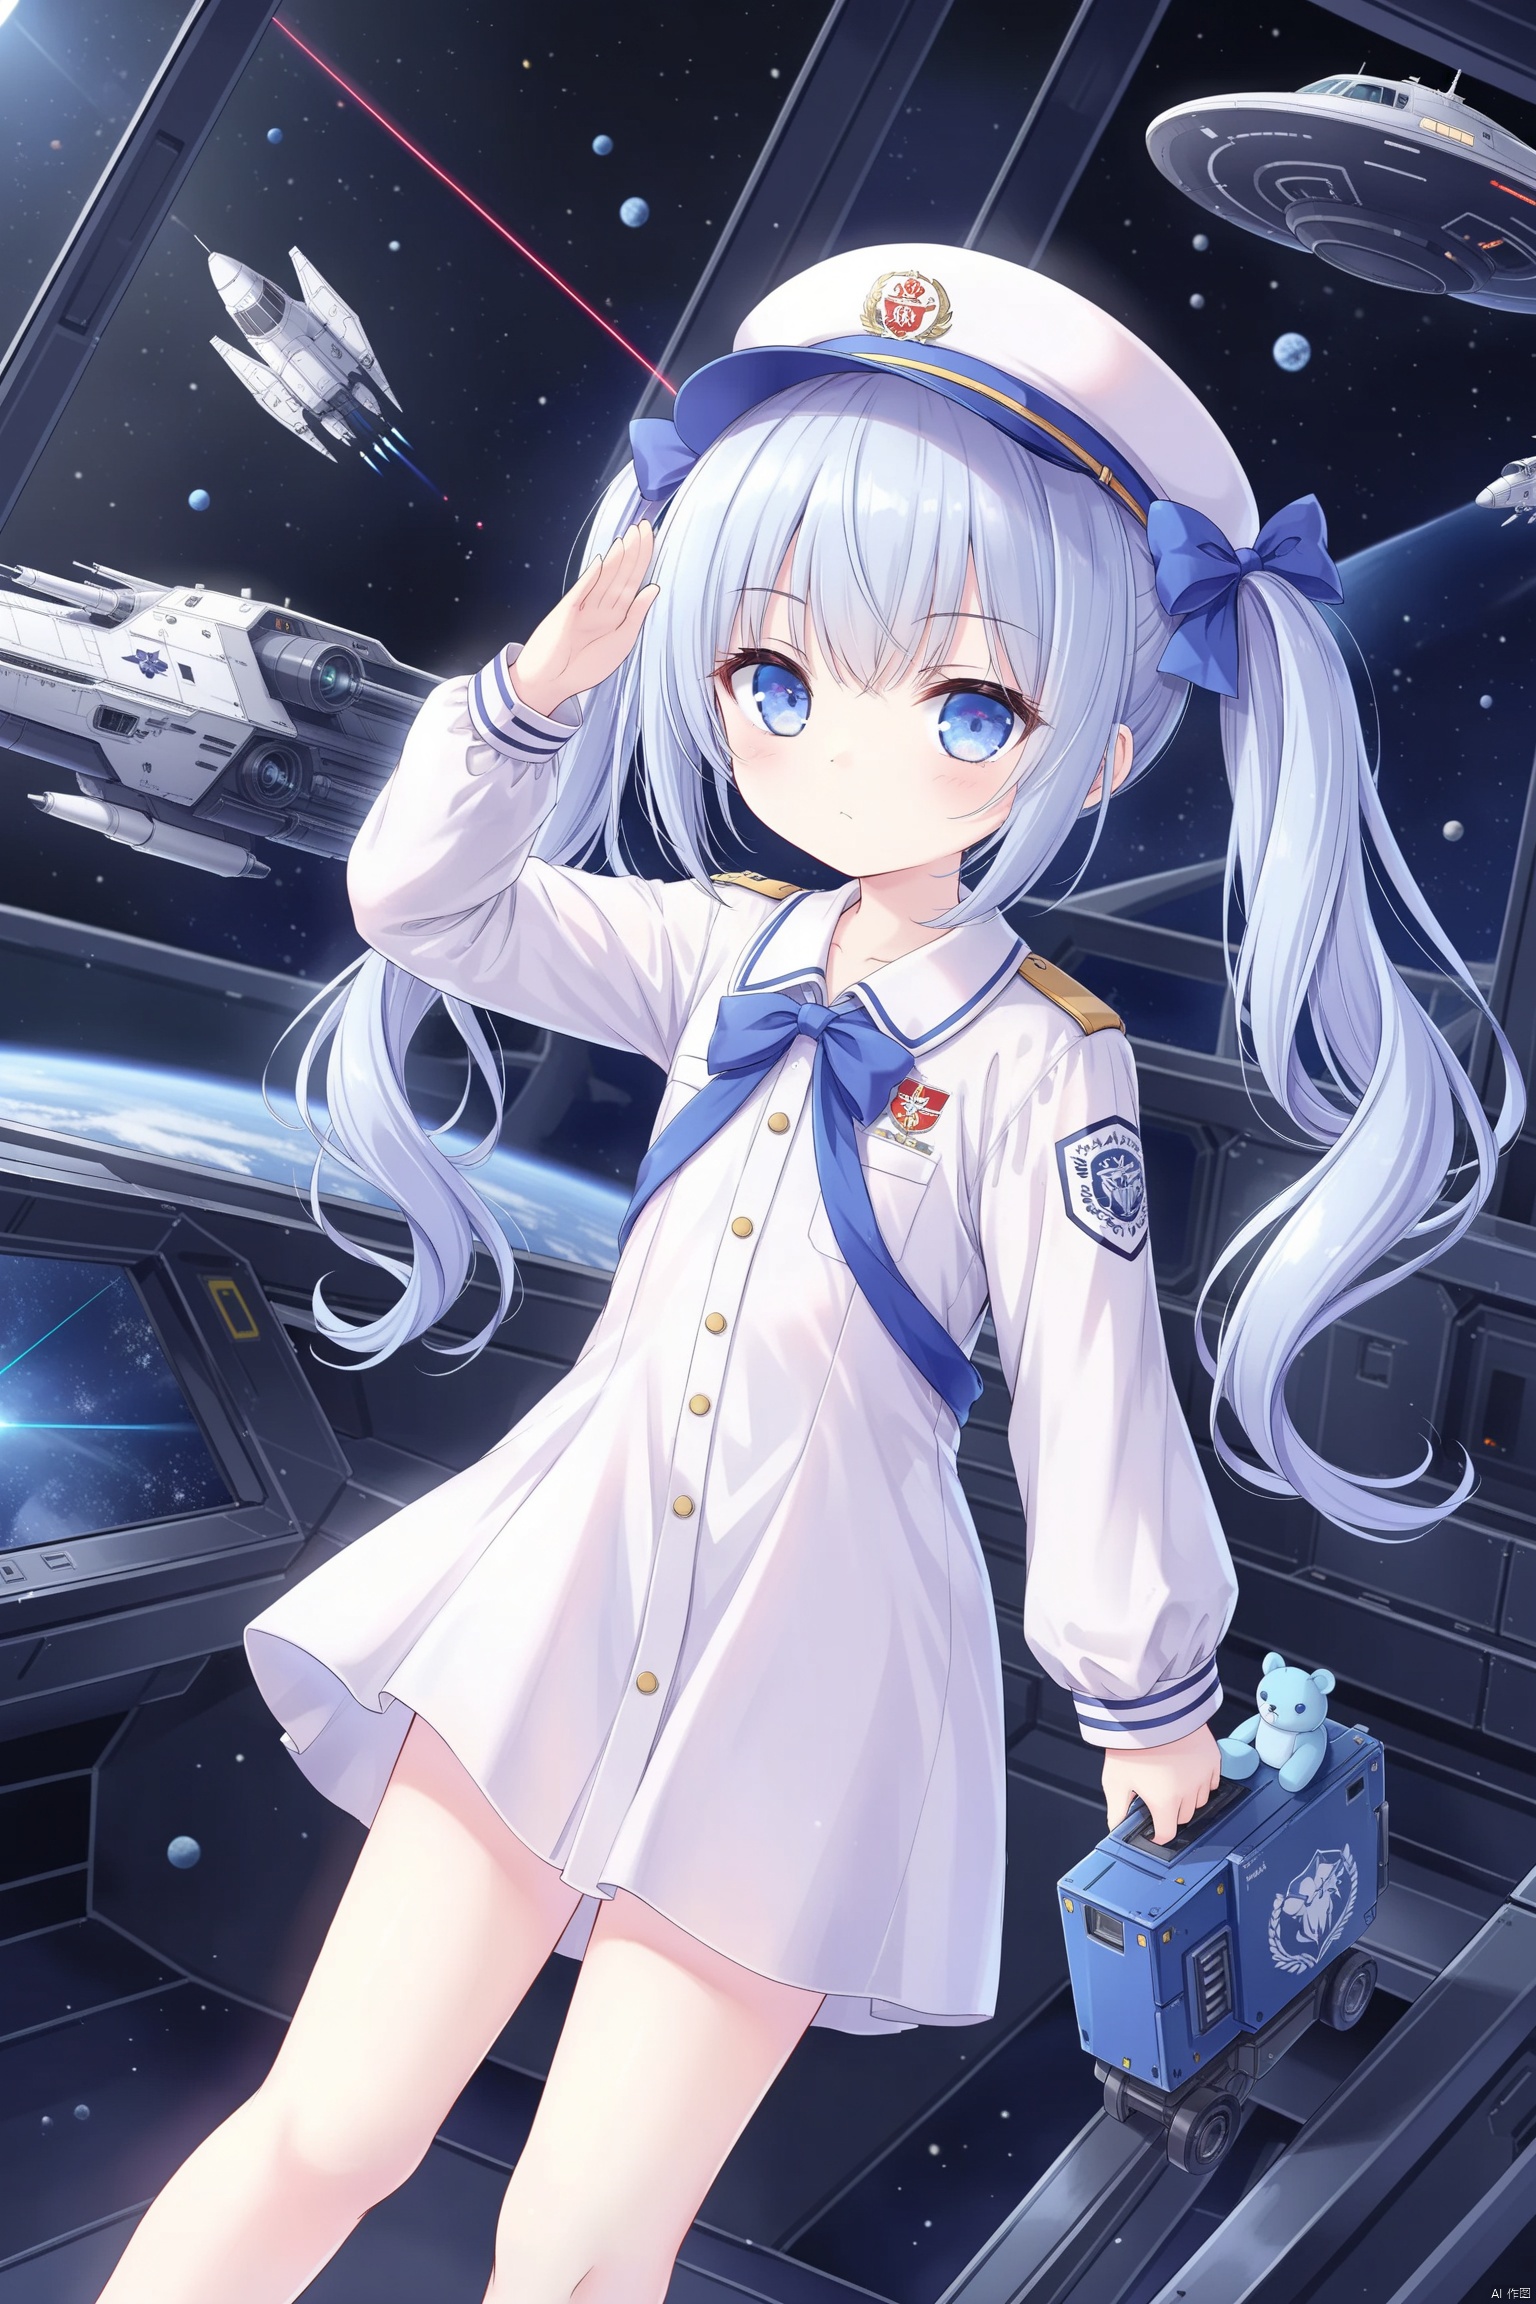 twintails,(loli),Wide-Angle, 1girl, solo, long_hair,Science Fiction Style, looking_at_viewer, blue_eyes,Cockpit, Window, Spaceship, Space Warship, Laser Cannon, Space Warsuit, Hat, Emblem, Space, Space Warfare, shirt,shirt bow,Salute, Serious,stuffed toy,holding stuffed sharkd,military uniform,ribbon